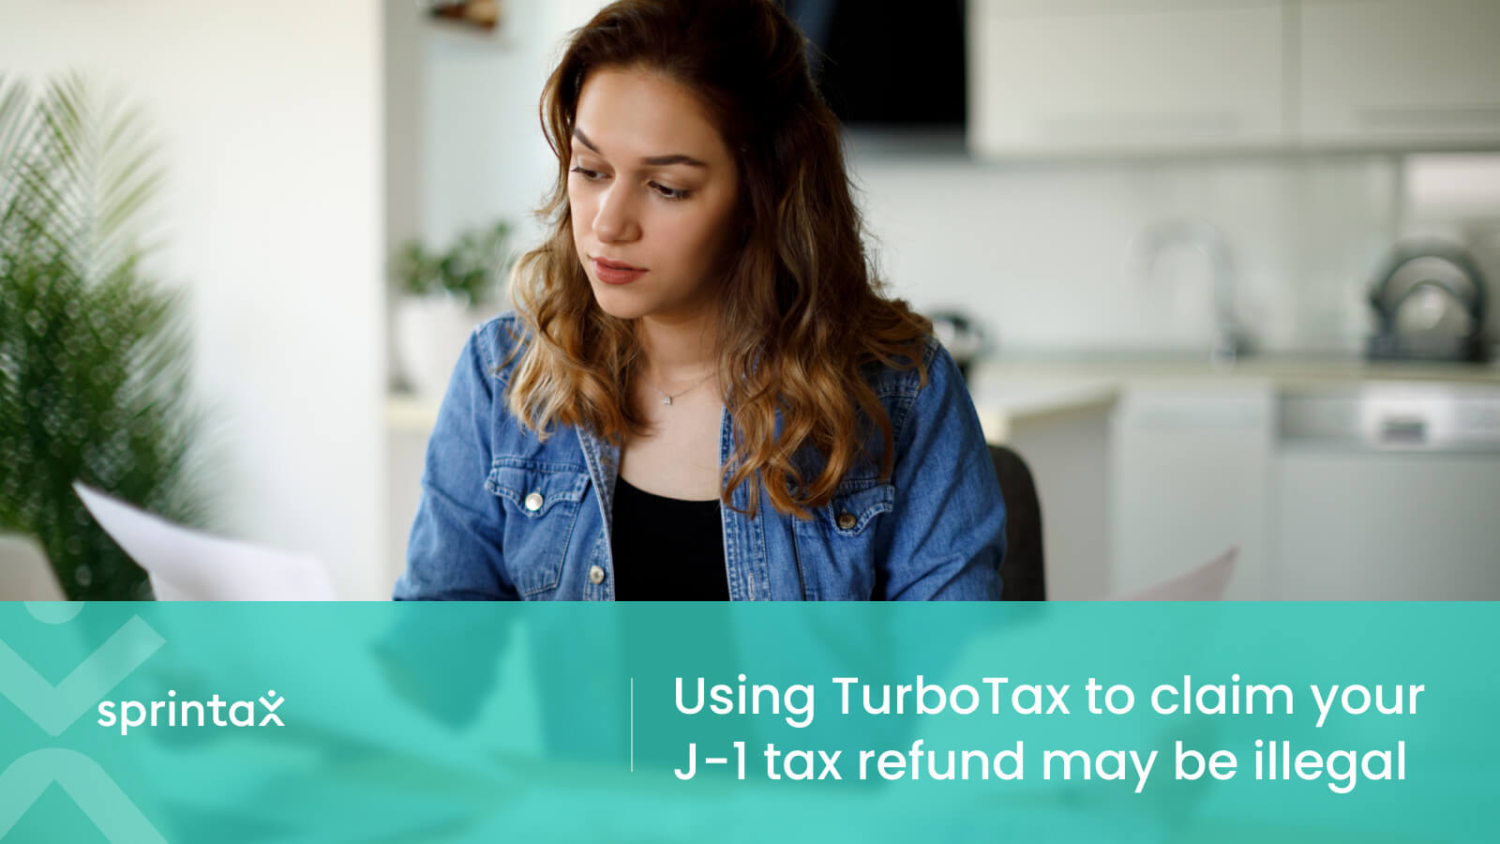 Claiming J-1 tax refund with Turbotax